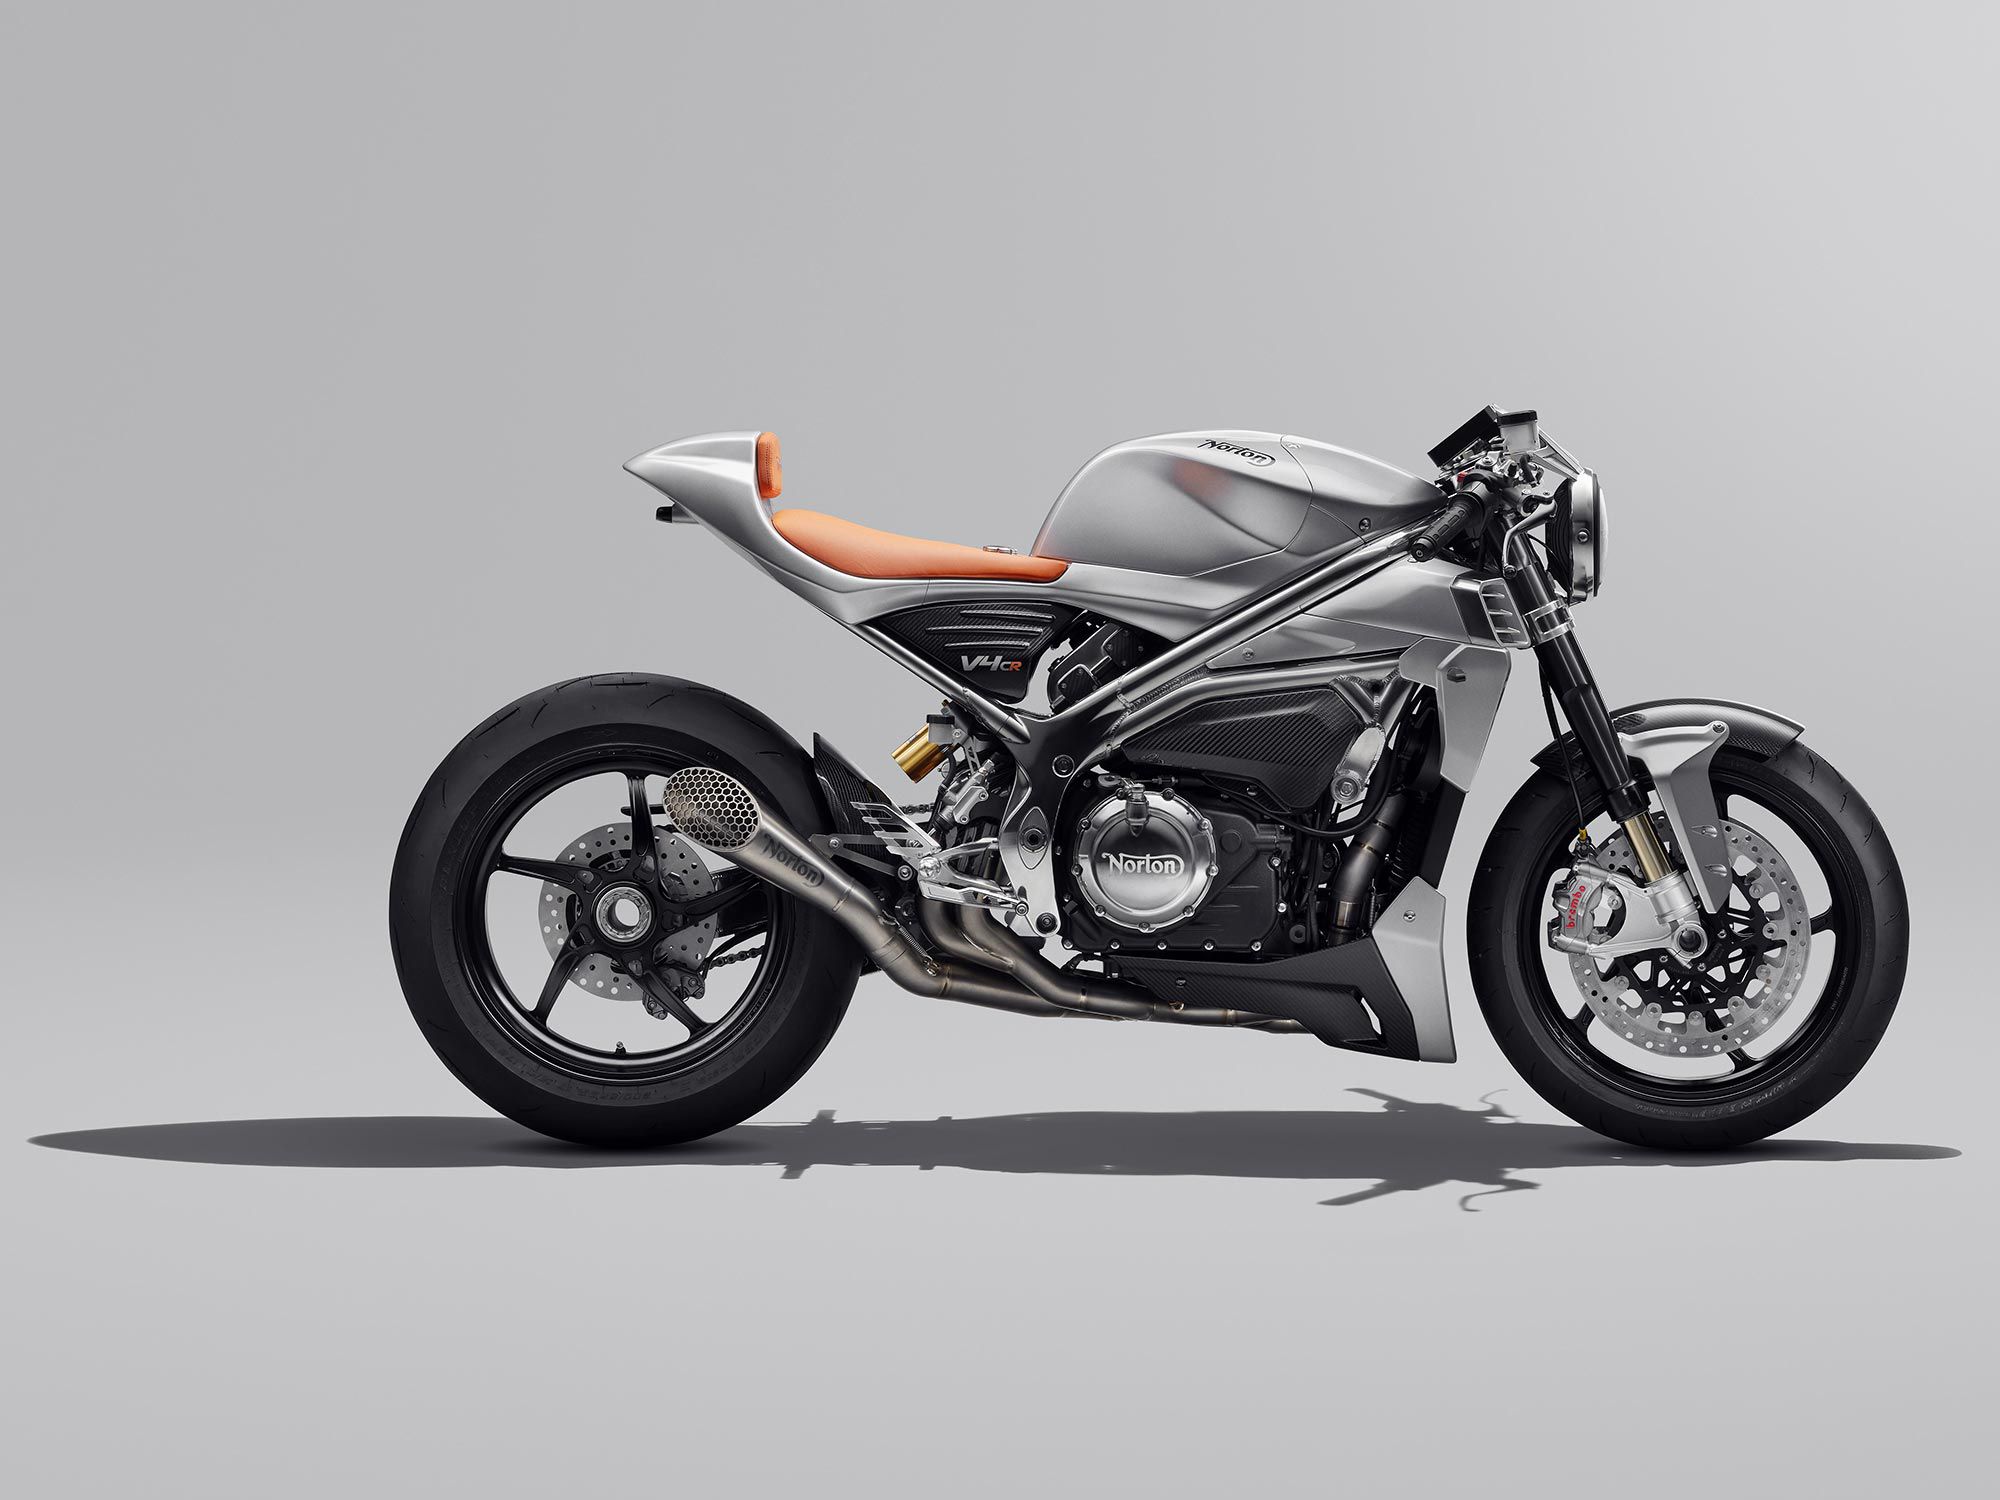 It’s not a streetfighter, it’s a cafe racer. Plan your posture accordingly for the Norton V4CR.